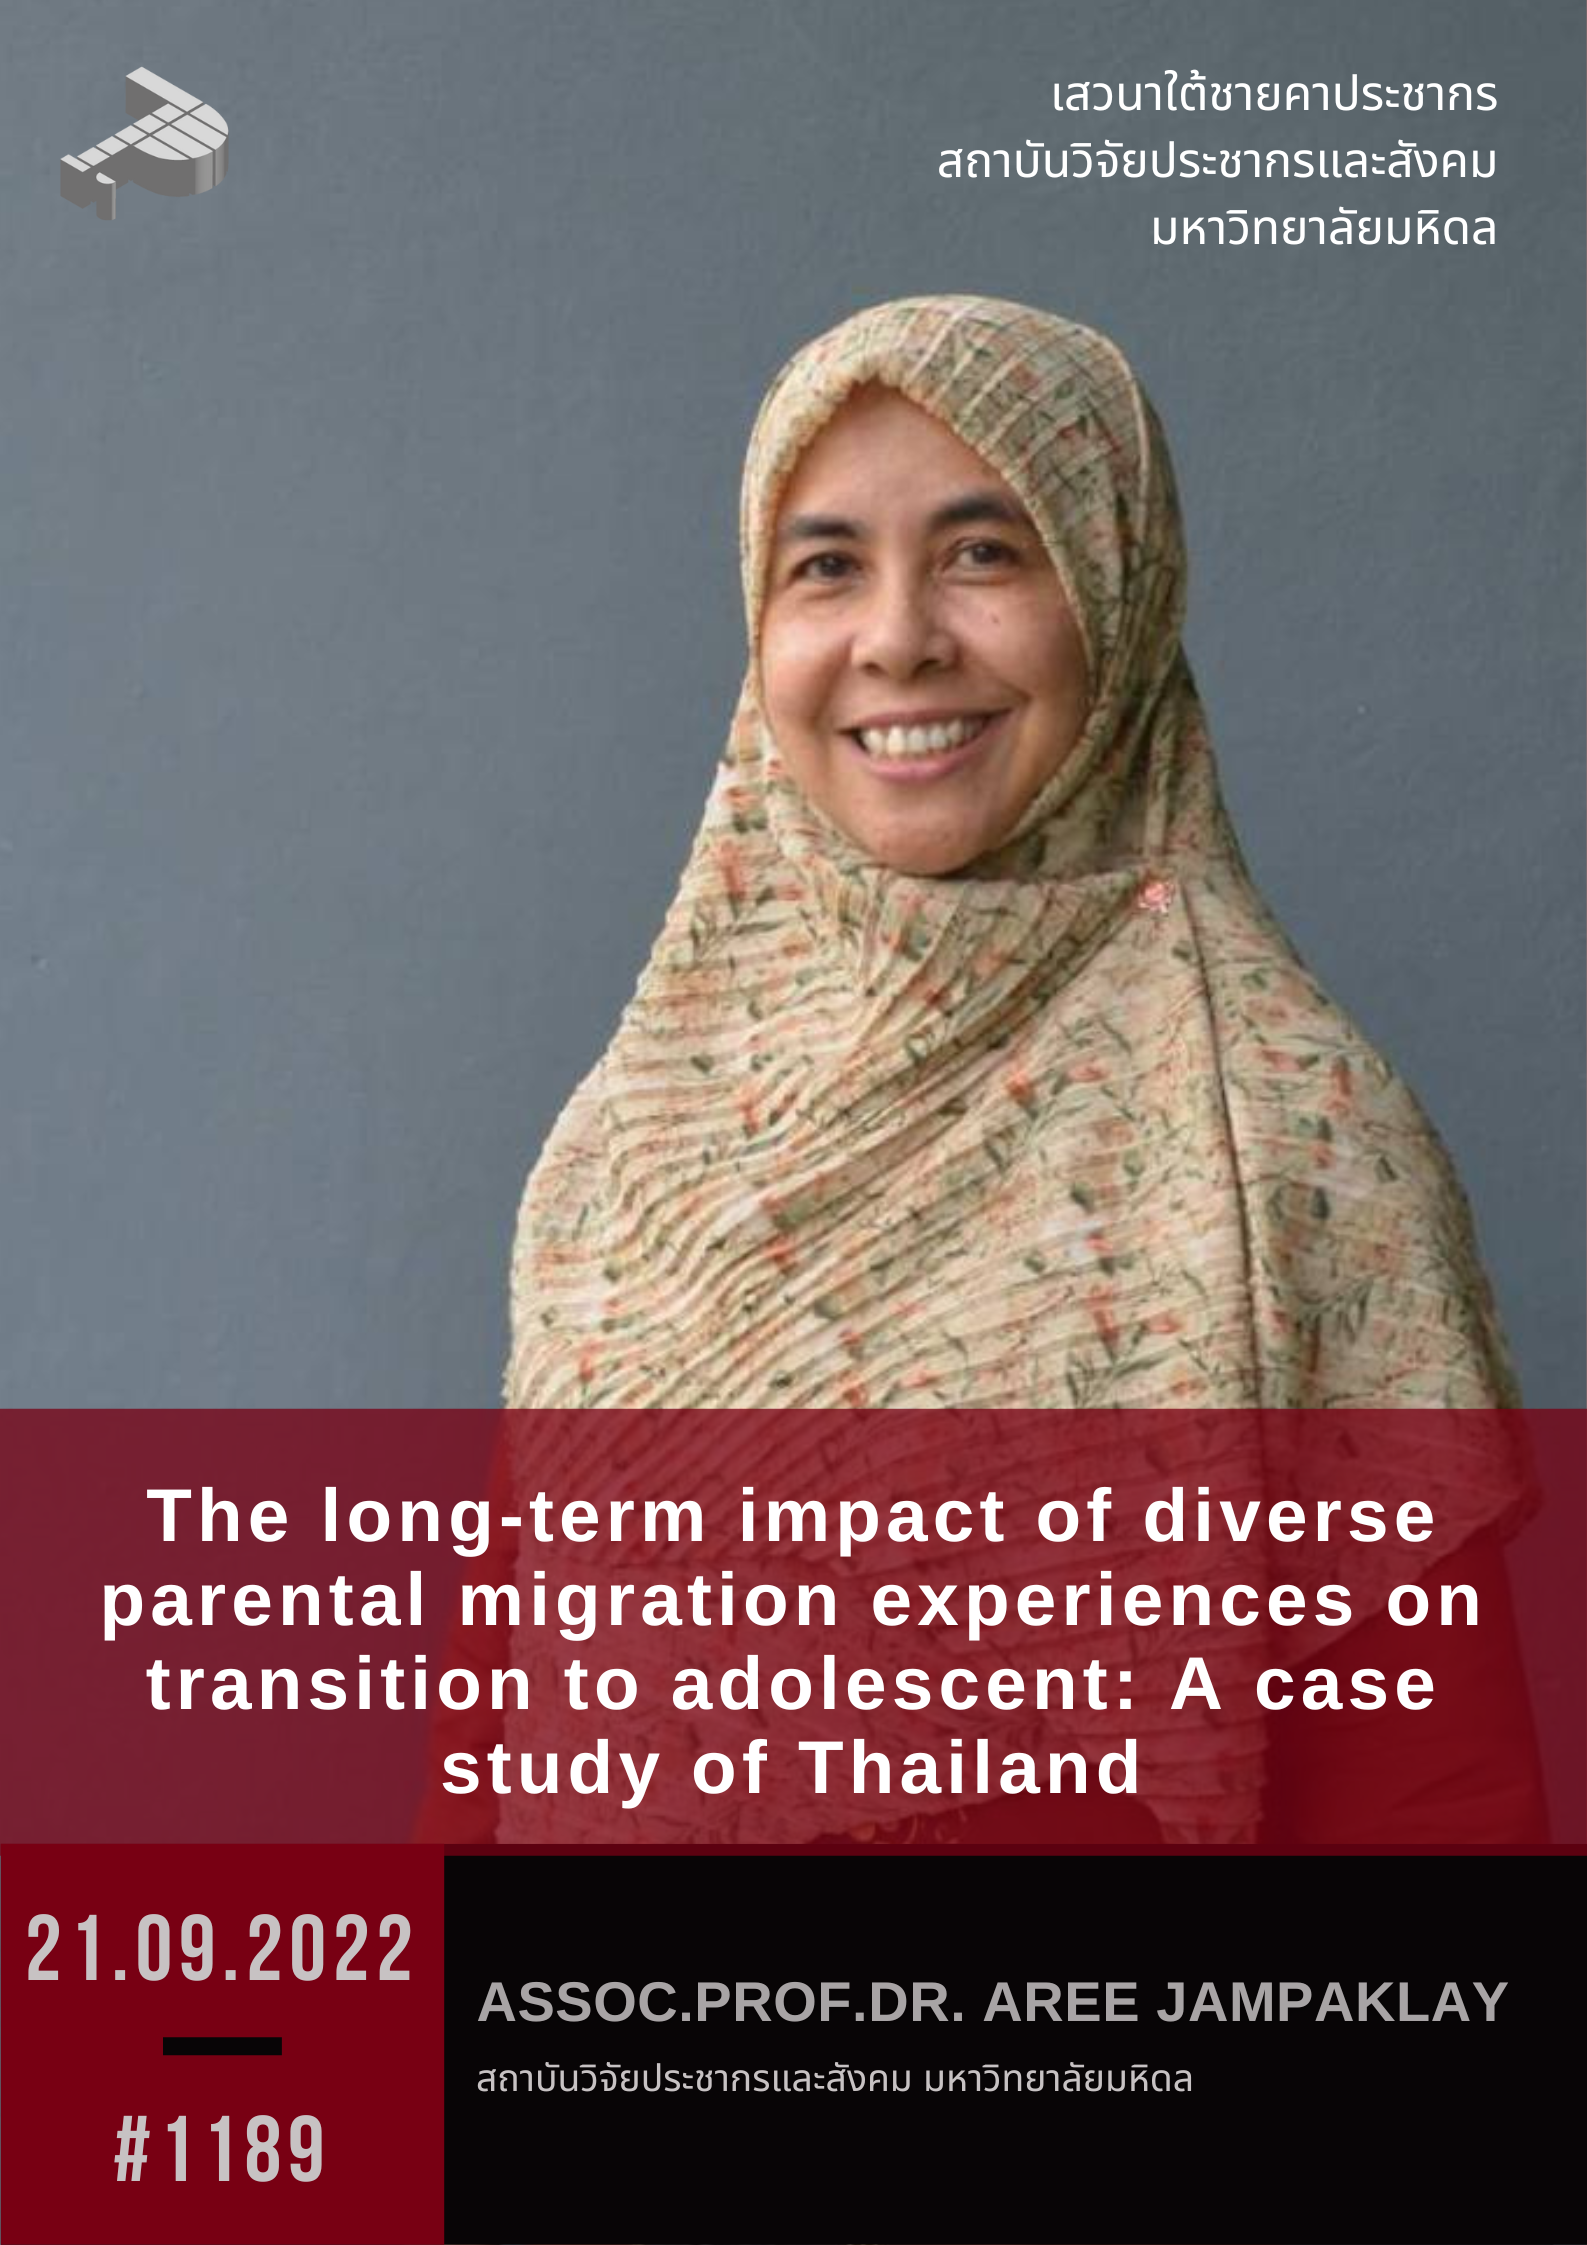 The long-term impact of diverse parental migration experiences on transition to adolescent: A case study of Thailand